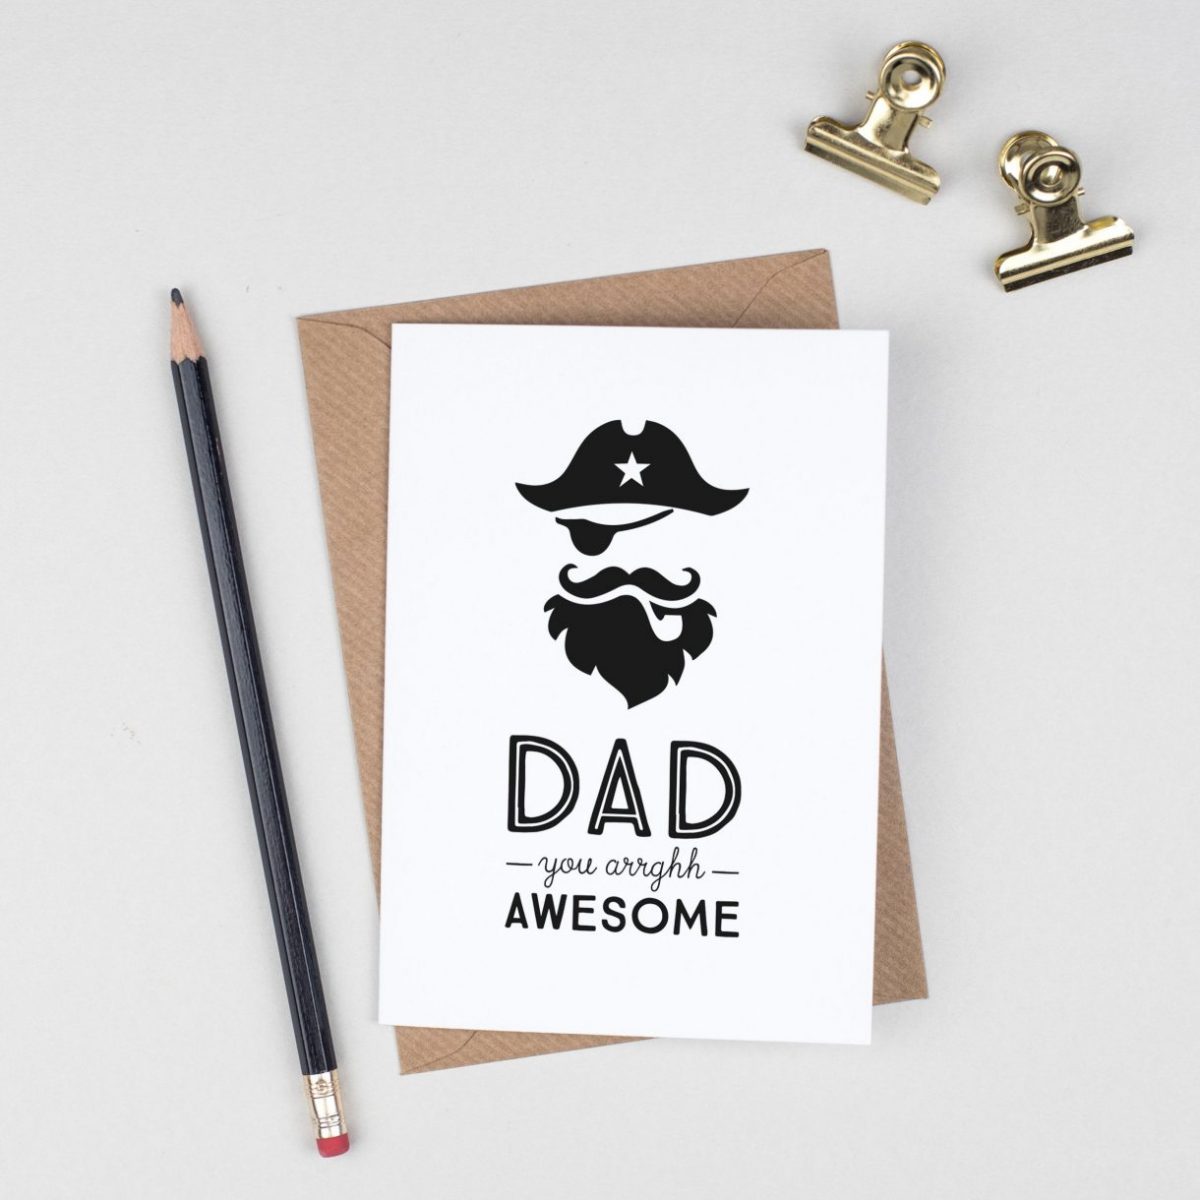 Pirate Fathers Day Card - Fathers Day Card Funny - Dad Birthday Card - First Fathers Day Card - Fathers Day Gift From Son - Awesome Daddy